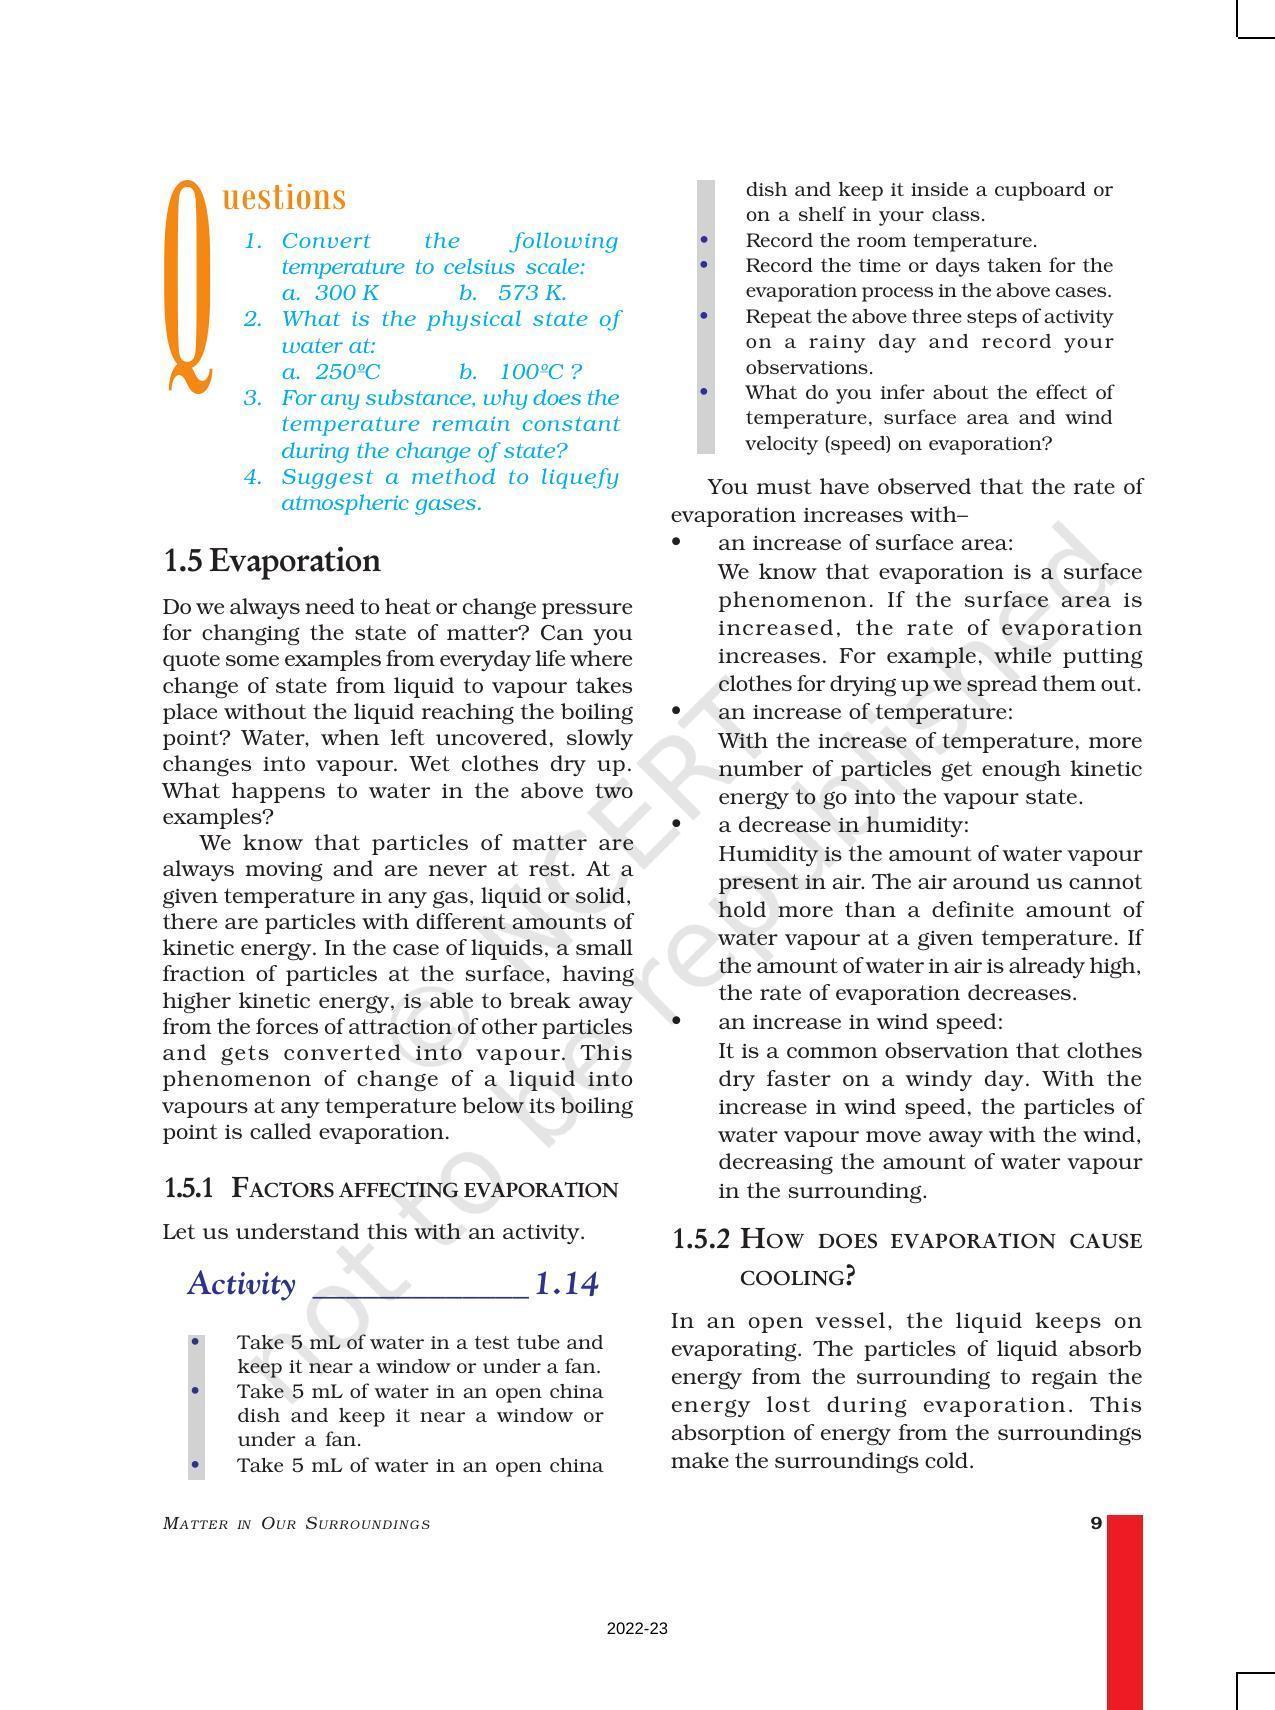 NCERT Book for Class 9 Science Chapter 1 Matter in Our Surroundings - Page 9